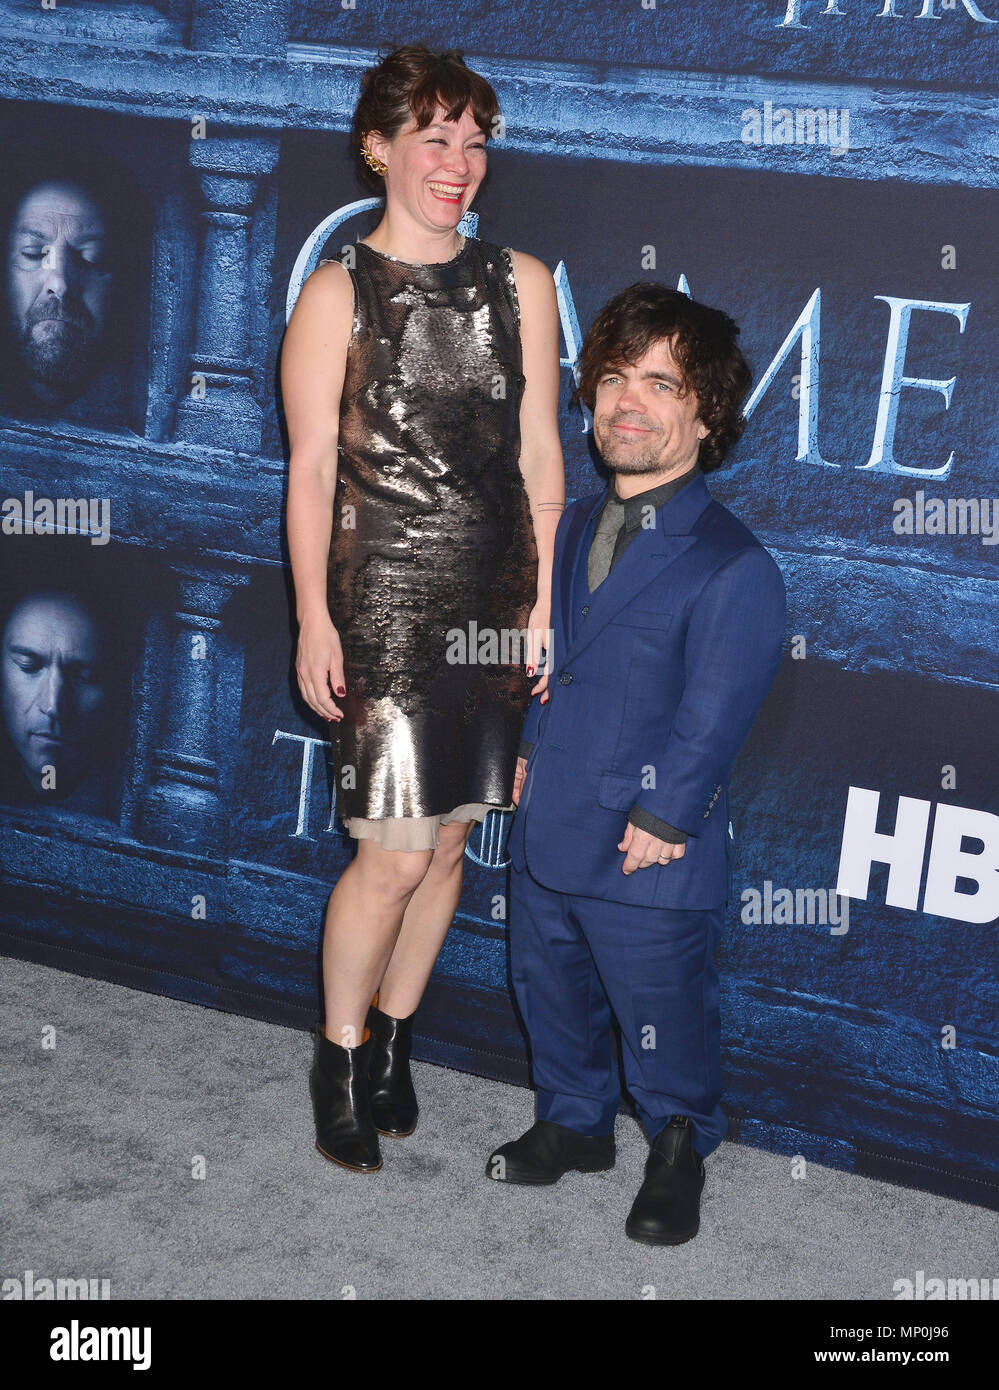 Peter Dinklage, Erica Schmidt 247 arriving at the Game of Thrones at the TCL Chinese Theatre in Los Angeles. April 10, 2016.Peter Dinklage, Erica Schmidt 247 ------------- Red Carpet Event, Vertical, USA, Film Industry, Celebrities,  Photography, Bestof, Arts Culture and Entertainment, Topix Celebrities fashion /  Vertical, Best of, Event in Hollywood Life - California,  Red Carpet and backstage, USA, Film Industry, Celebrities,  movie celebrities, TV celebrities, Music celebrities, Photography, Bestof, Arts Culture and Entertainment,  Topix, vertical,  family from from the year , 2016, inquir Stock Photo